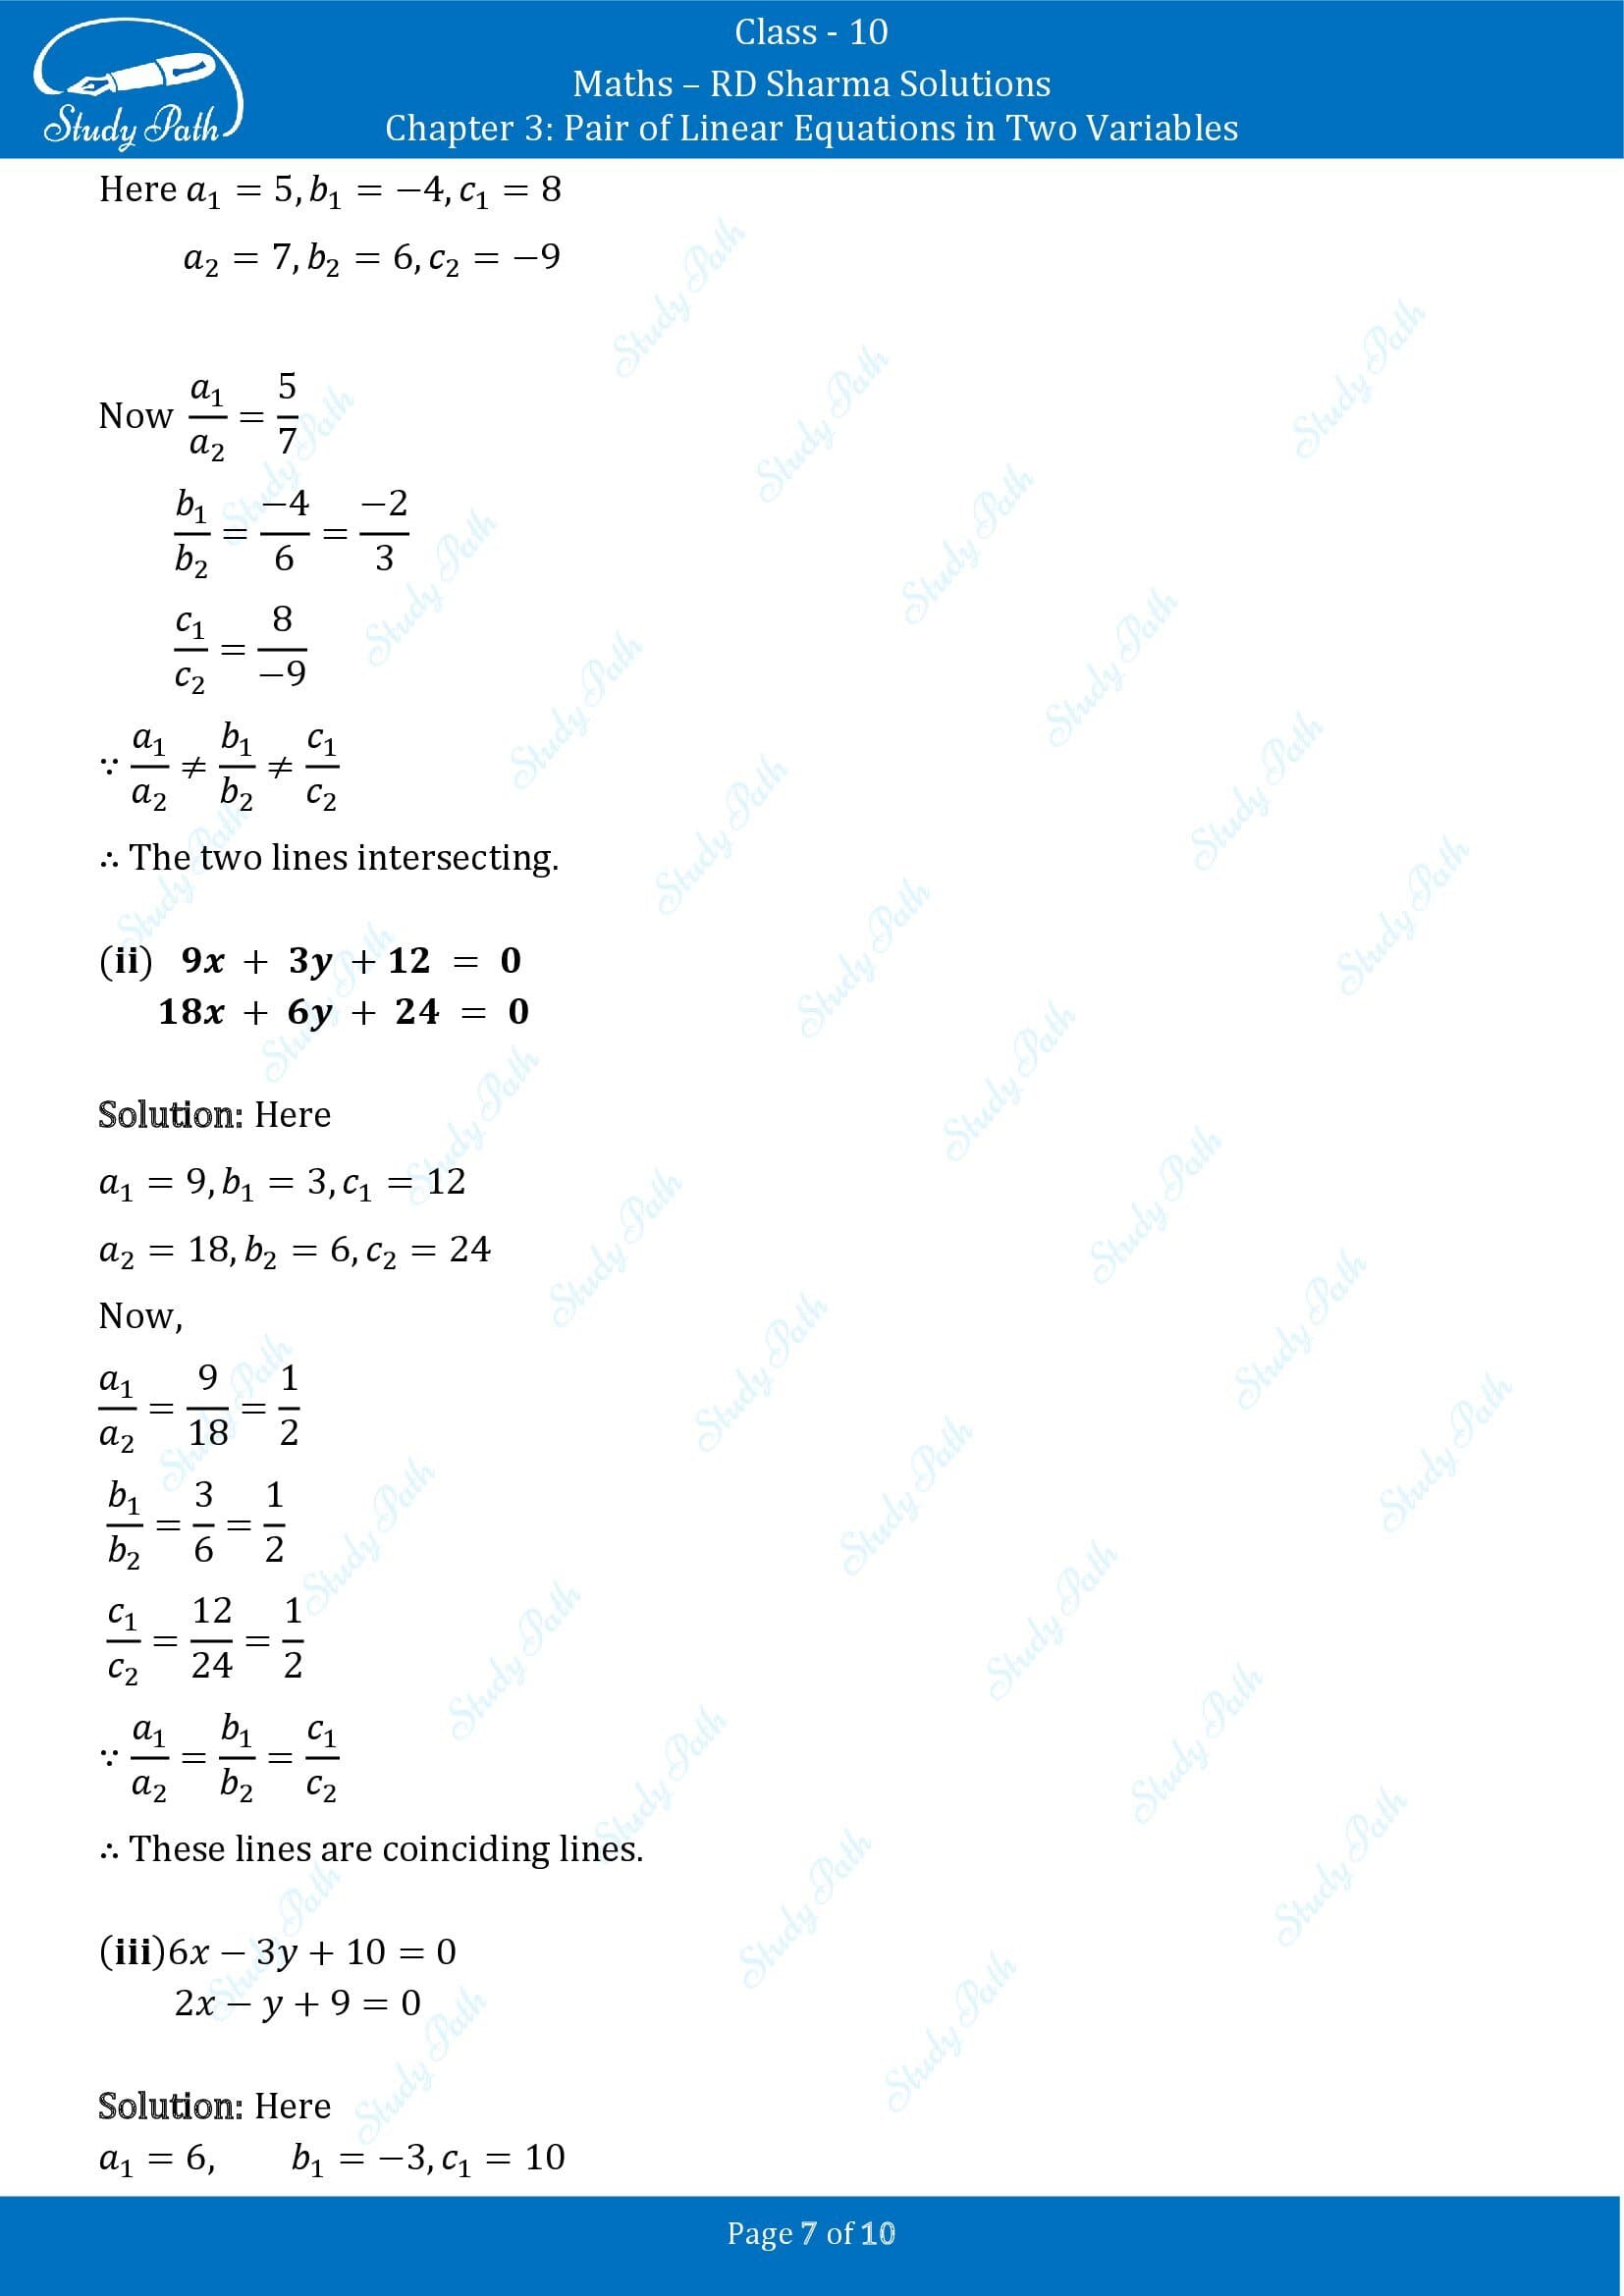 RD Sharma Solutions Class 10 Chapter 3 Pair of Linear Equations in Two Variables Exercise 3.1 00007